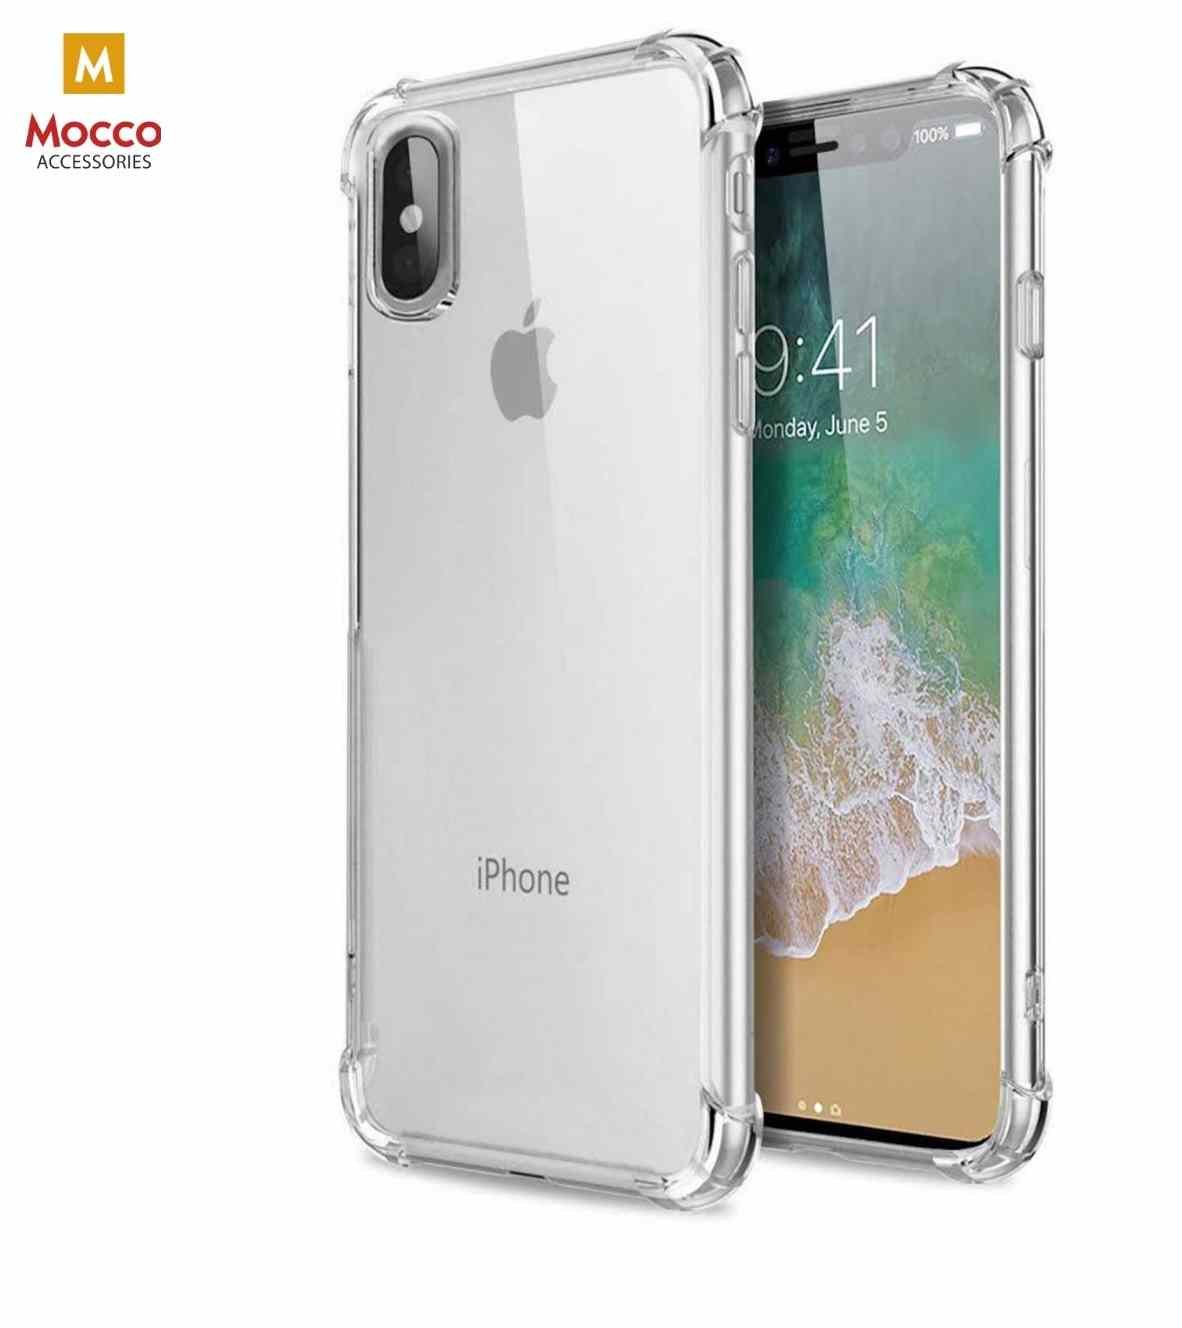 Mocco Anti Shock Case 0.5 mm Silicone Case for Samsung J610 Galaxy J6 Plus (2018) Transparent